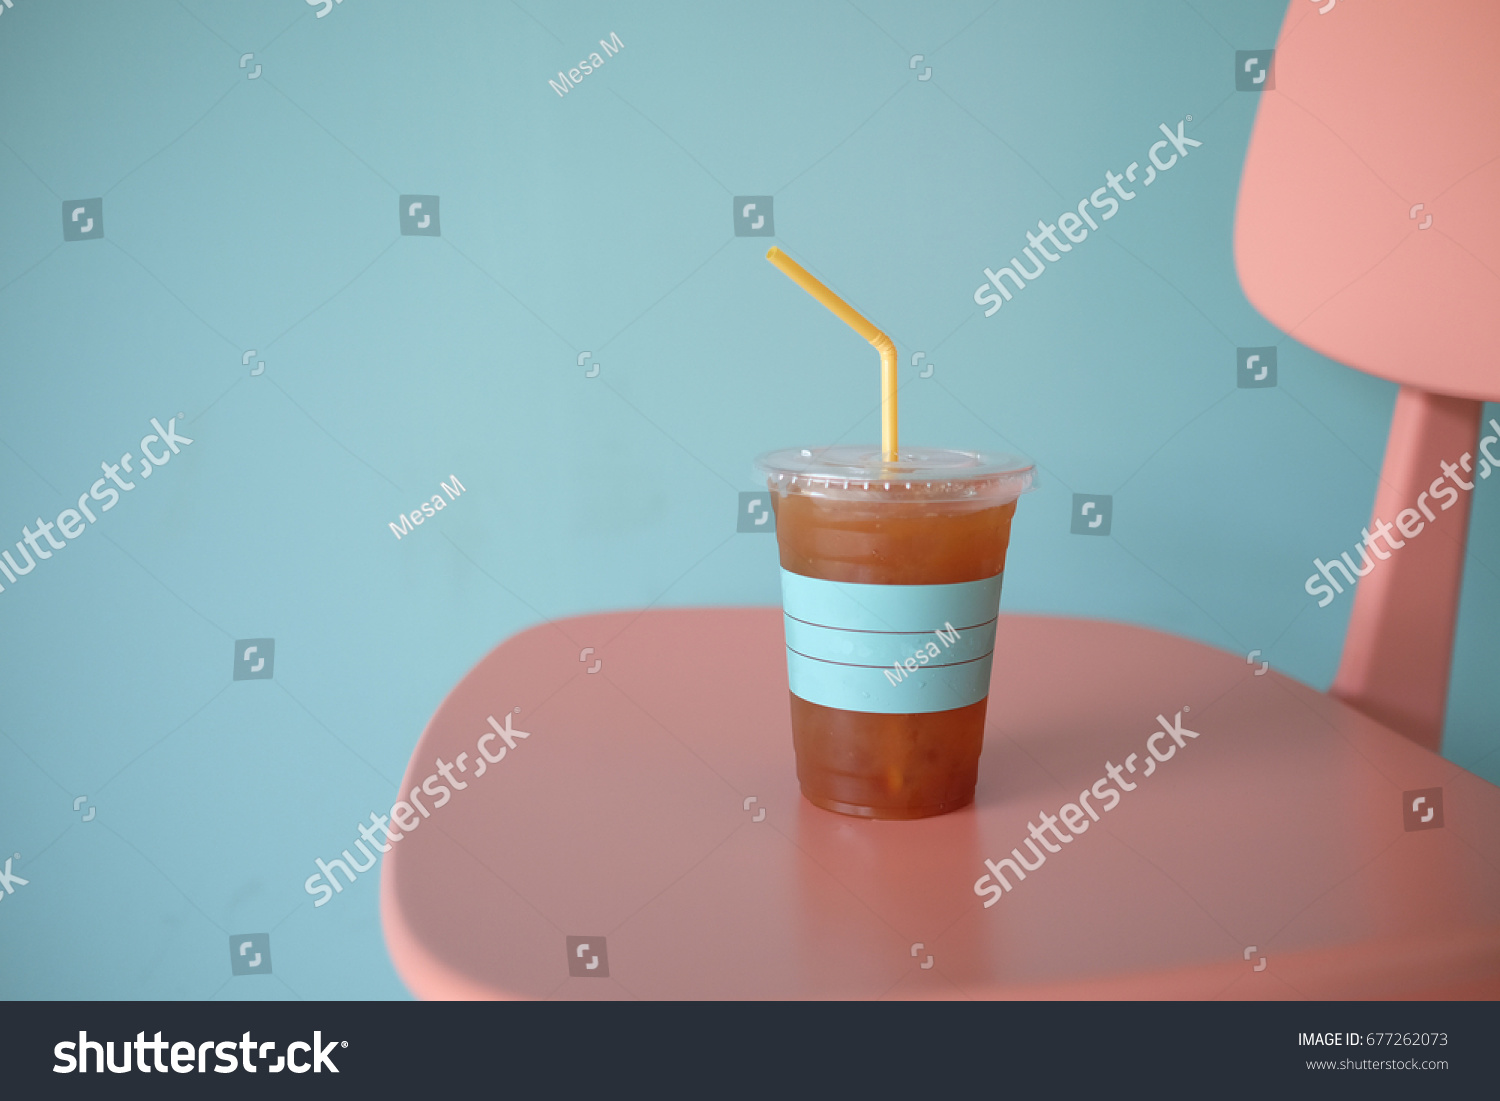 Download Cup Coffee Tea Yellow Straw On Backgrounds Textures Stock Image 677262073 Yellowimages Mockups